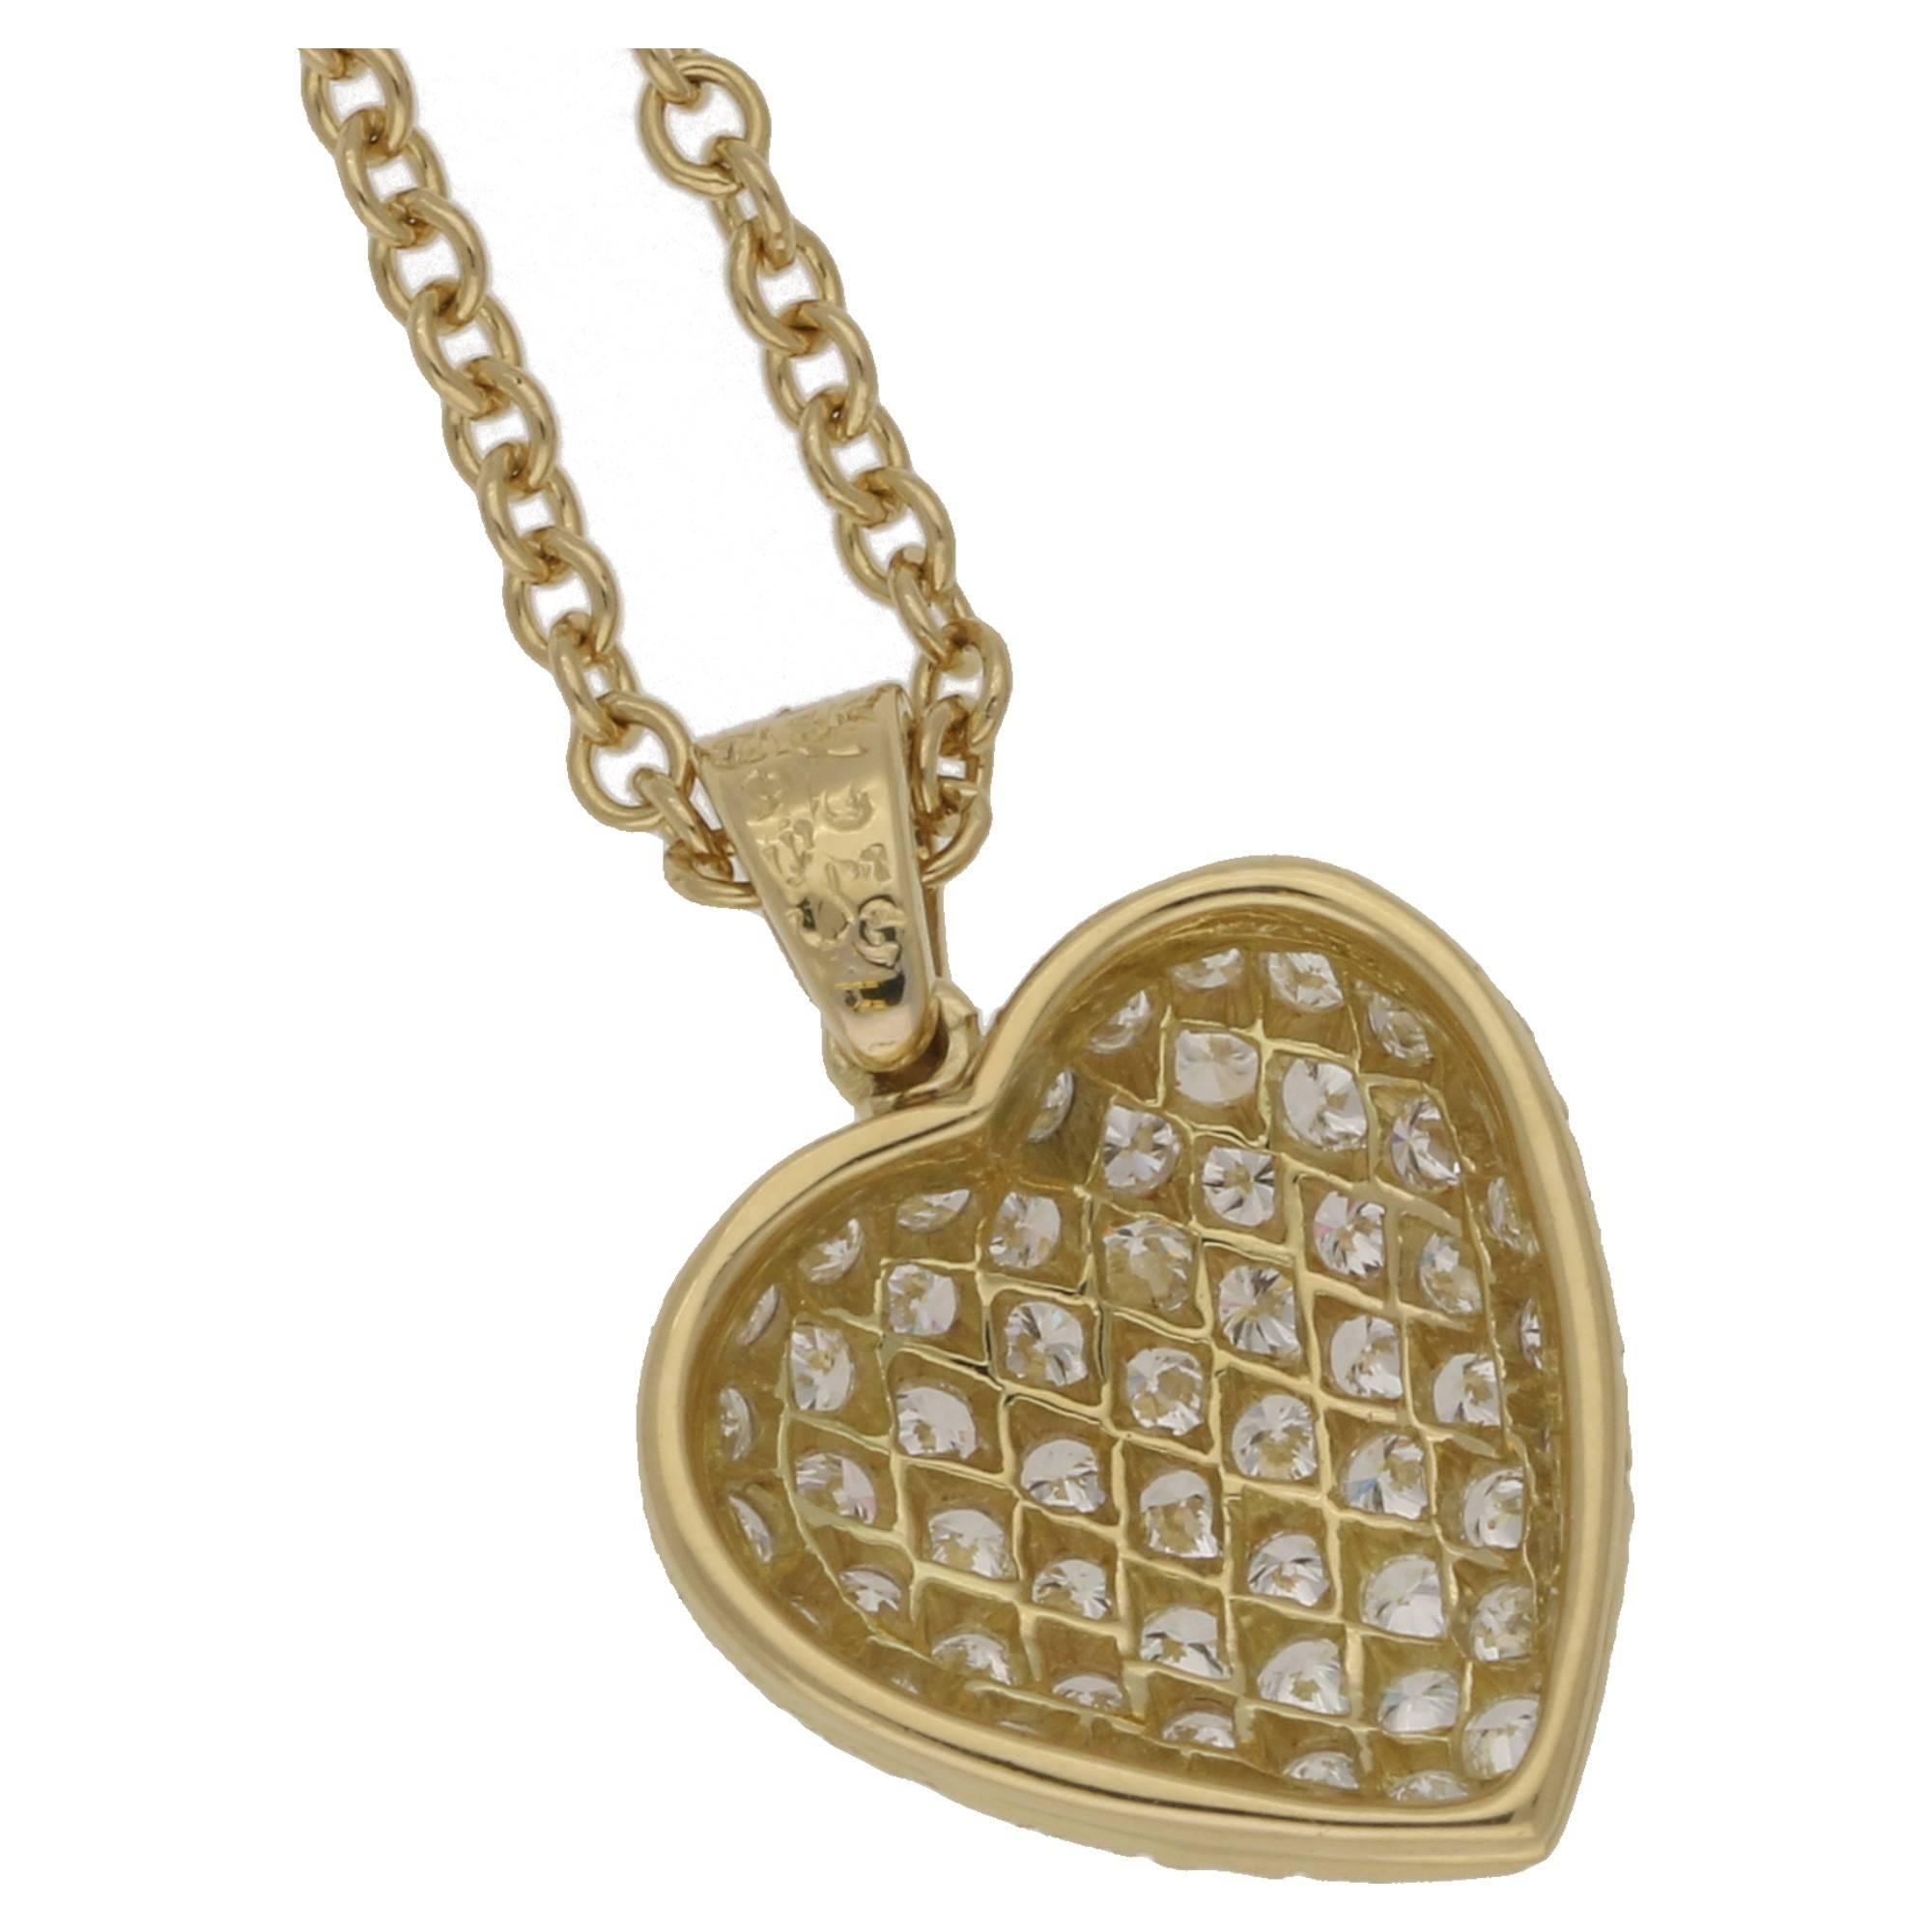 A gorgeous Van Cleef & Arpels diamond heart pendant in 18ct yellow gold on an 18 inch trace chain. The heart features 58 round brilliant cut diamonds pavé set to an articulated bail set with three diamonds. Total diamond weight is estimated as